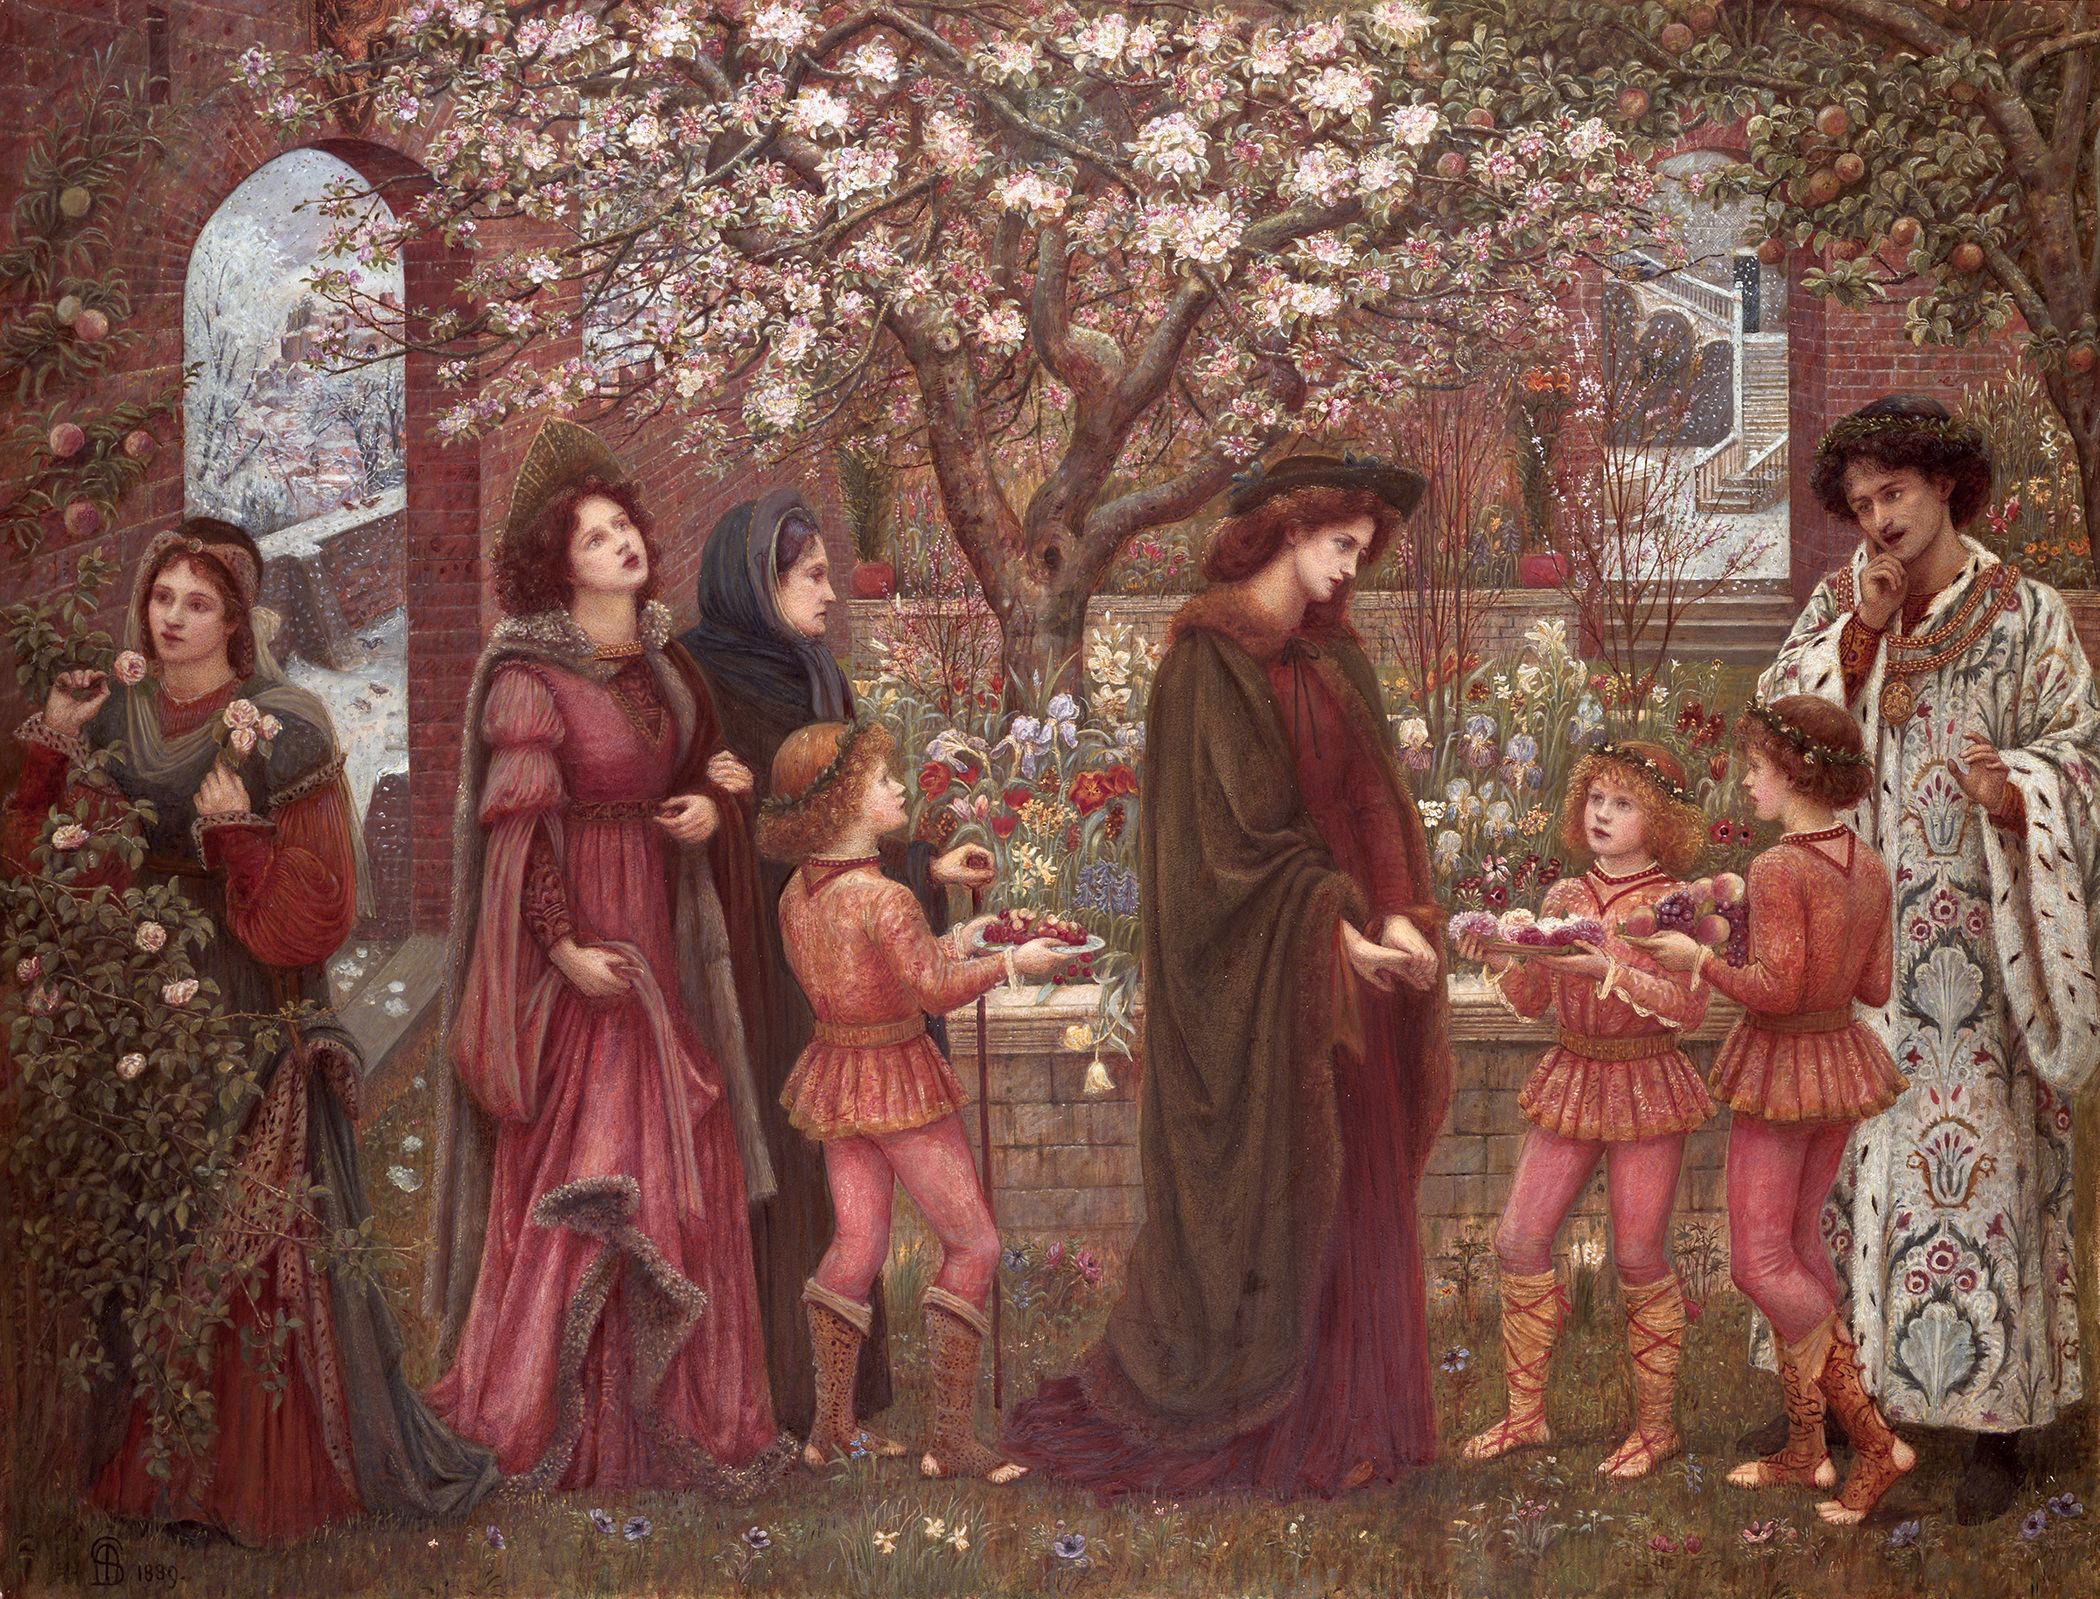 Figures gathered around a garden smelling flowers and carrying fruit platters